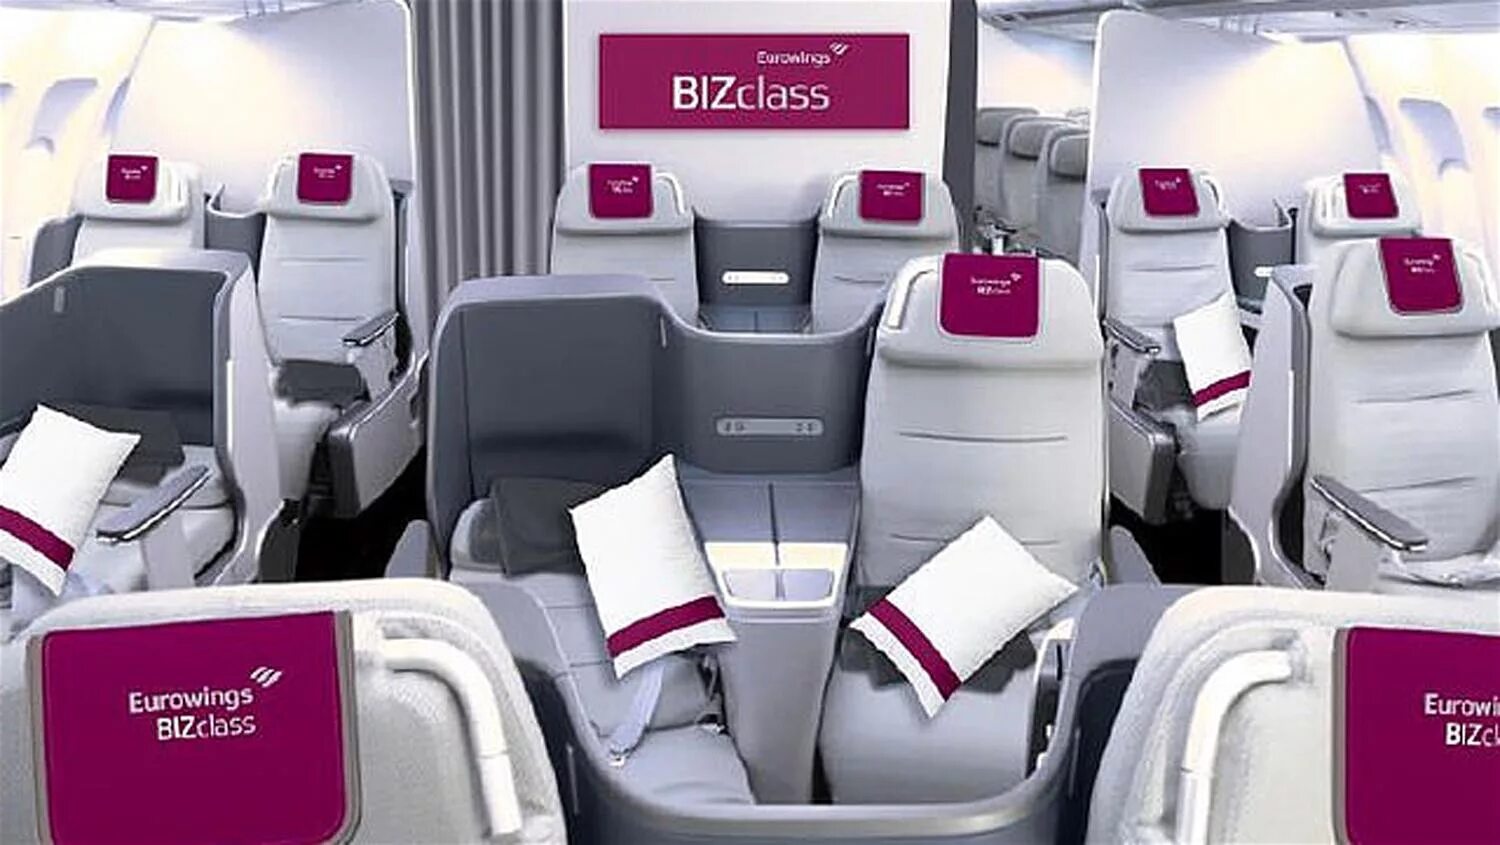 Eurowings discover Business class a 320. Airbus a320 Eurowings. Eurowings bizclass. A330-300 Eurowings Business class.